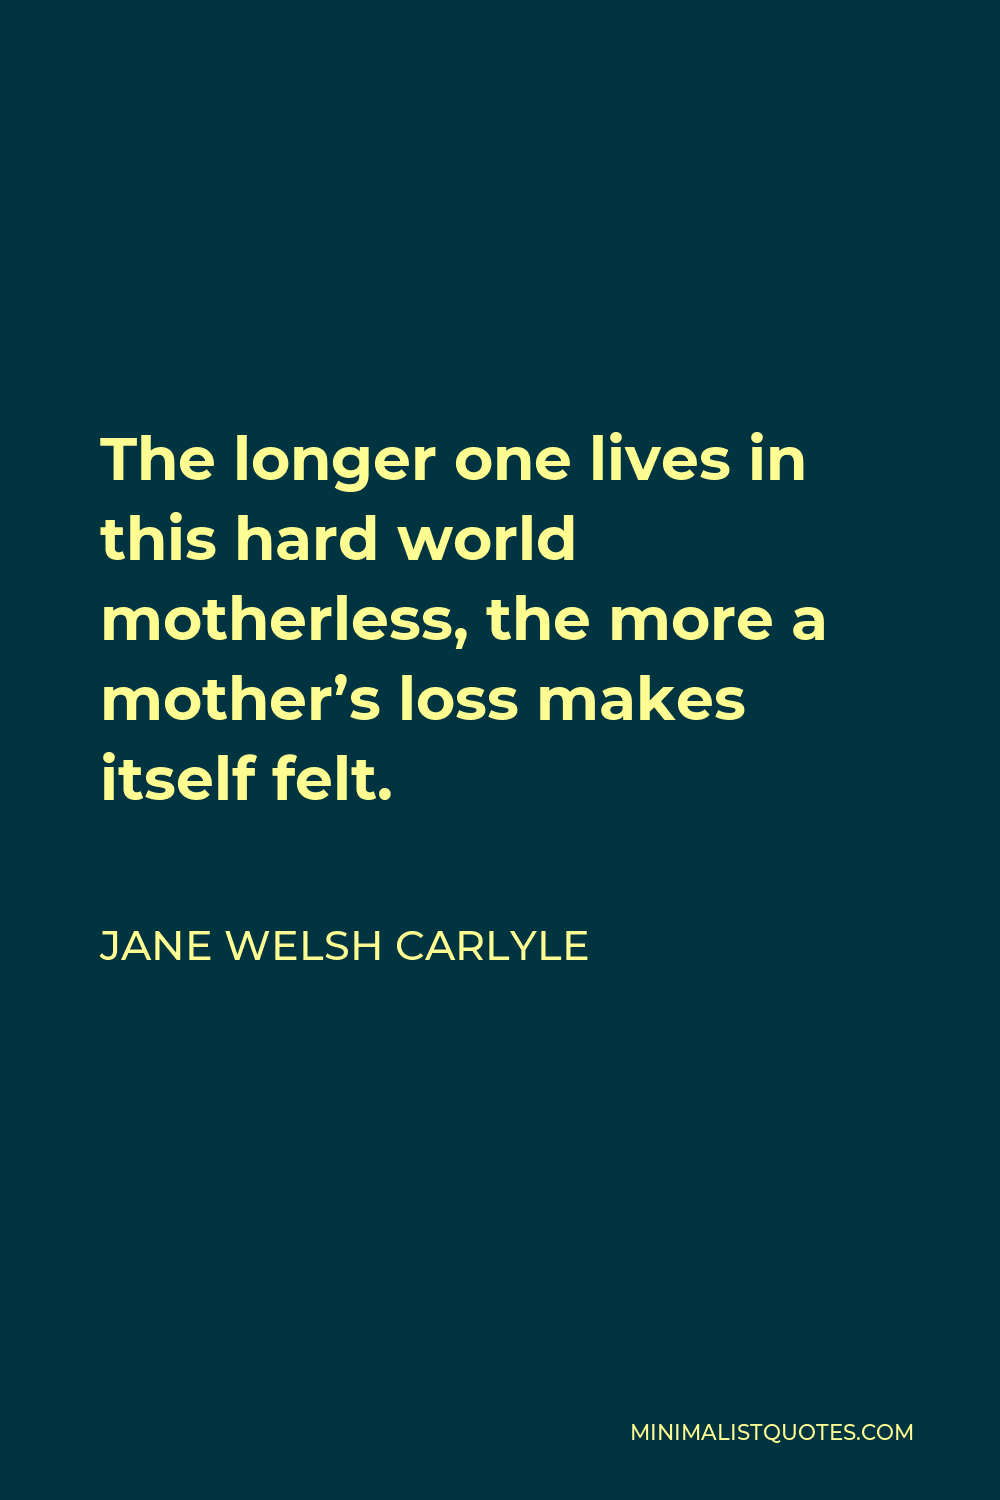 Jane Welsh Carlyle Quote - The longer one lives in this hard world motherless, the more a mother’s loss makes itself felt.